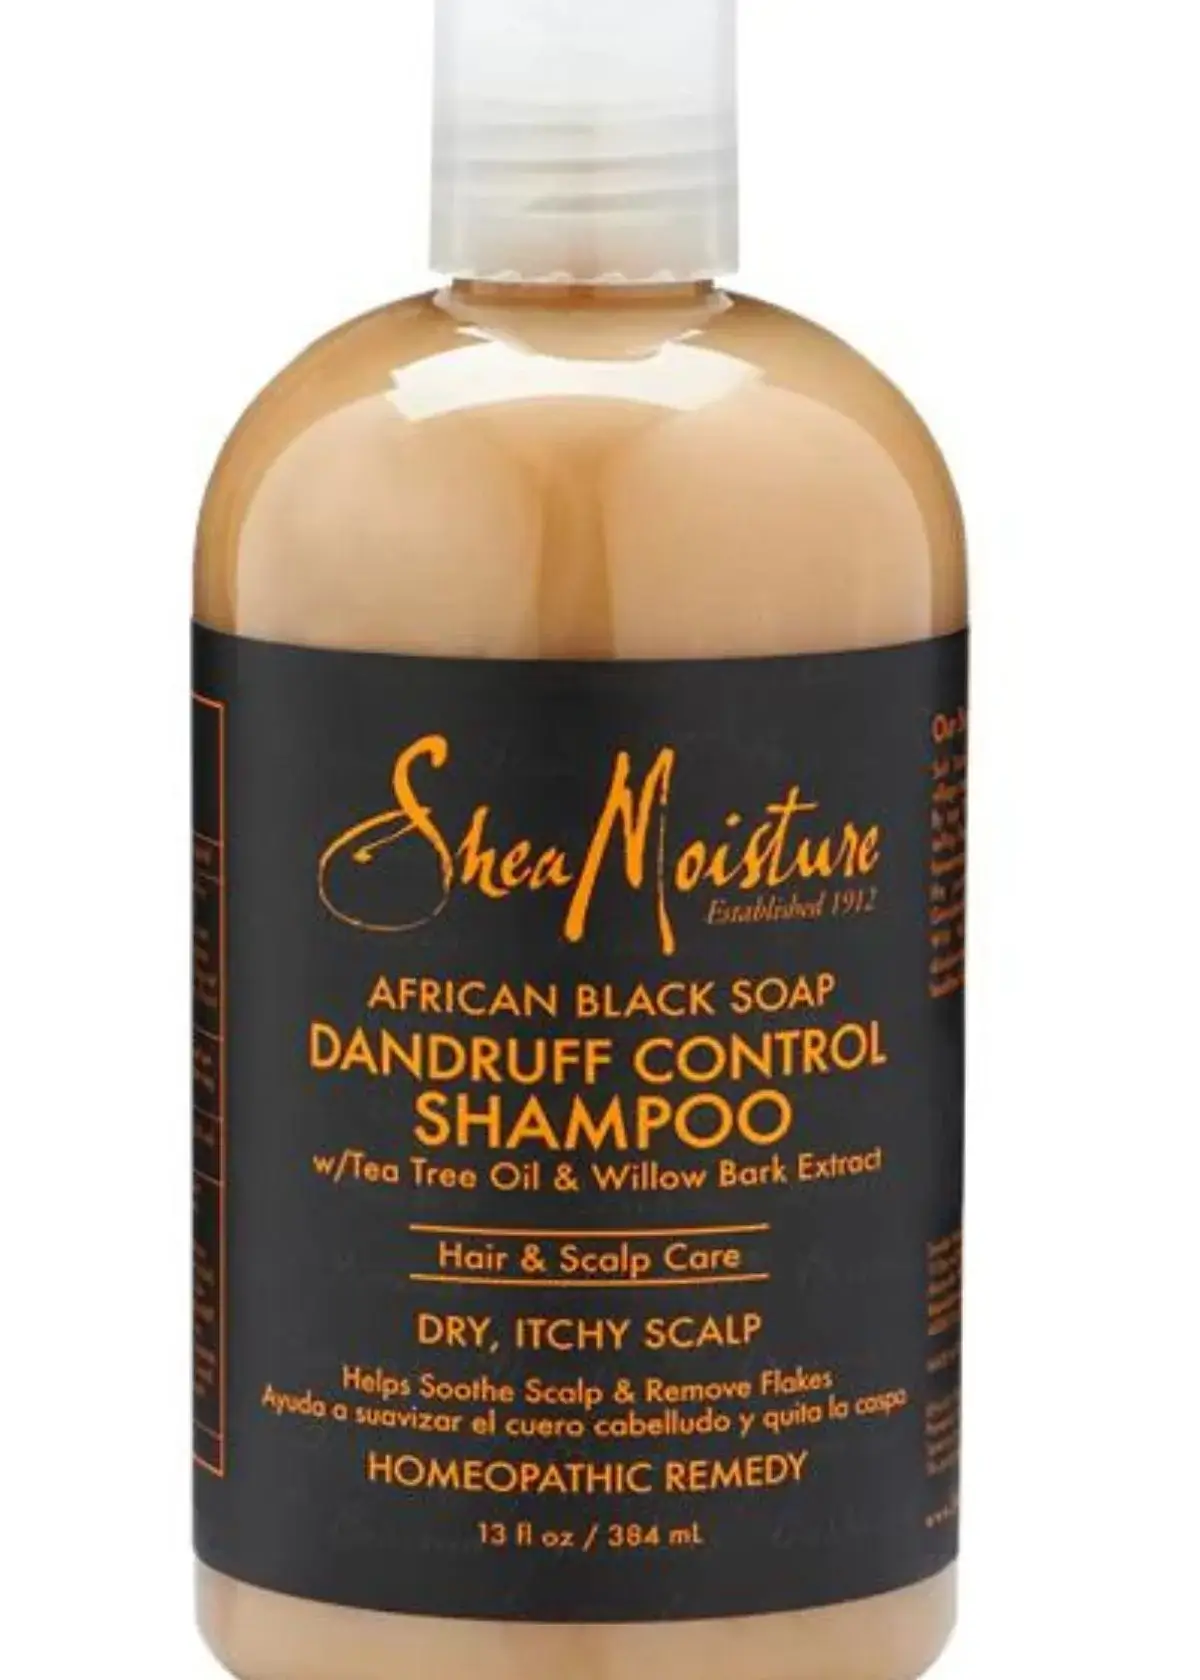 What factors make a dandruff shampoo suitable for African American hair?